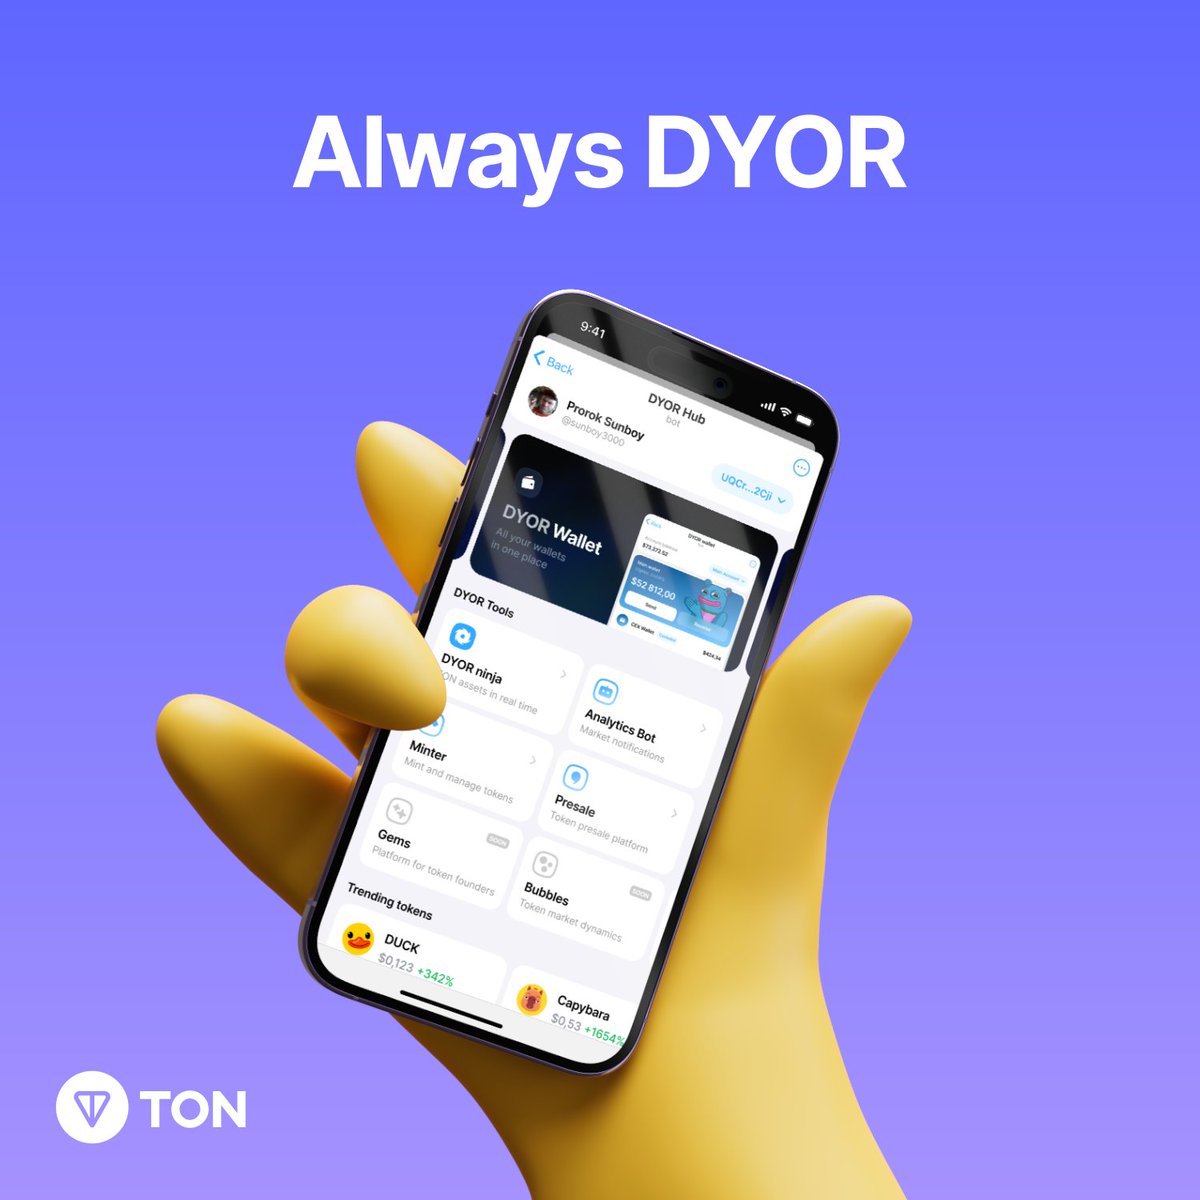 Discover @dyorninja, a top data and asset platform on @ton_blockchain with comprehensive token data, upcoming NFTs & dApps. With 1M+ views & 100K+ users last month, DYOR is a powerhouse in the crypto space. $TON Don't miss their Telegram Mini App launch: t.me/dyorninja/80.